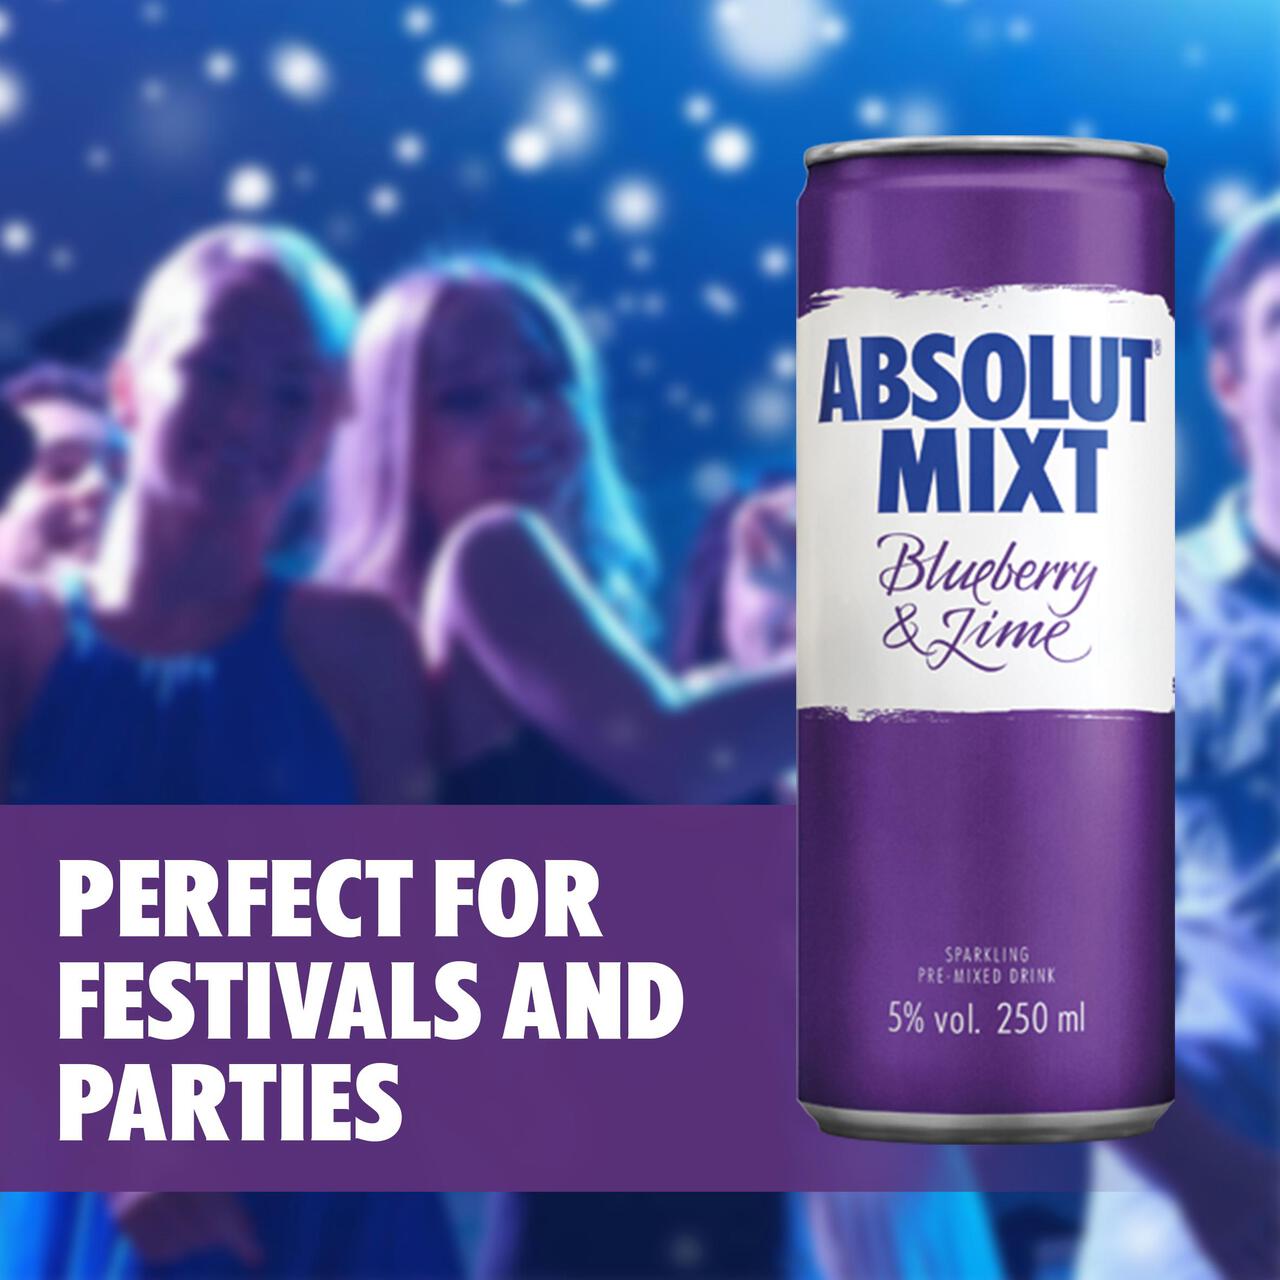 Absolut Mixt Blueberry & Lime Swedish Vodka Pre-Mixed Can 250ml